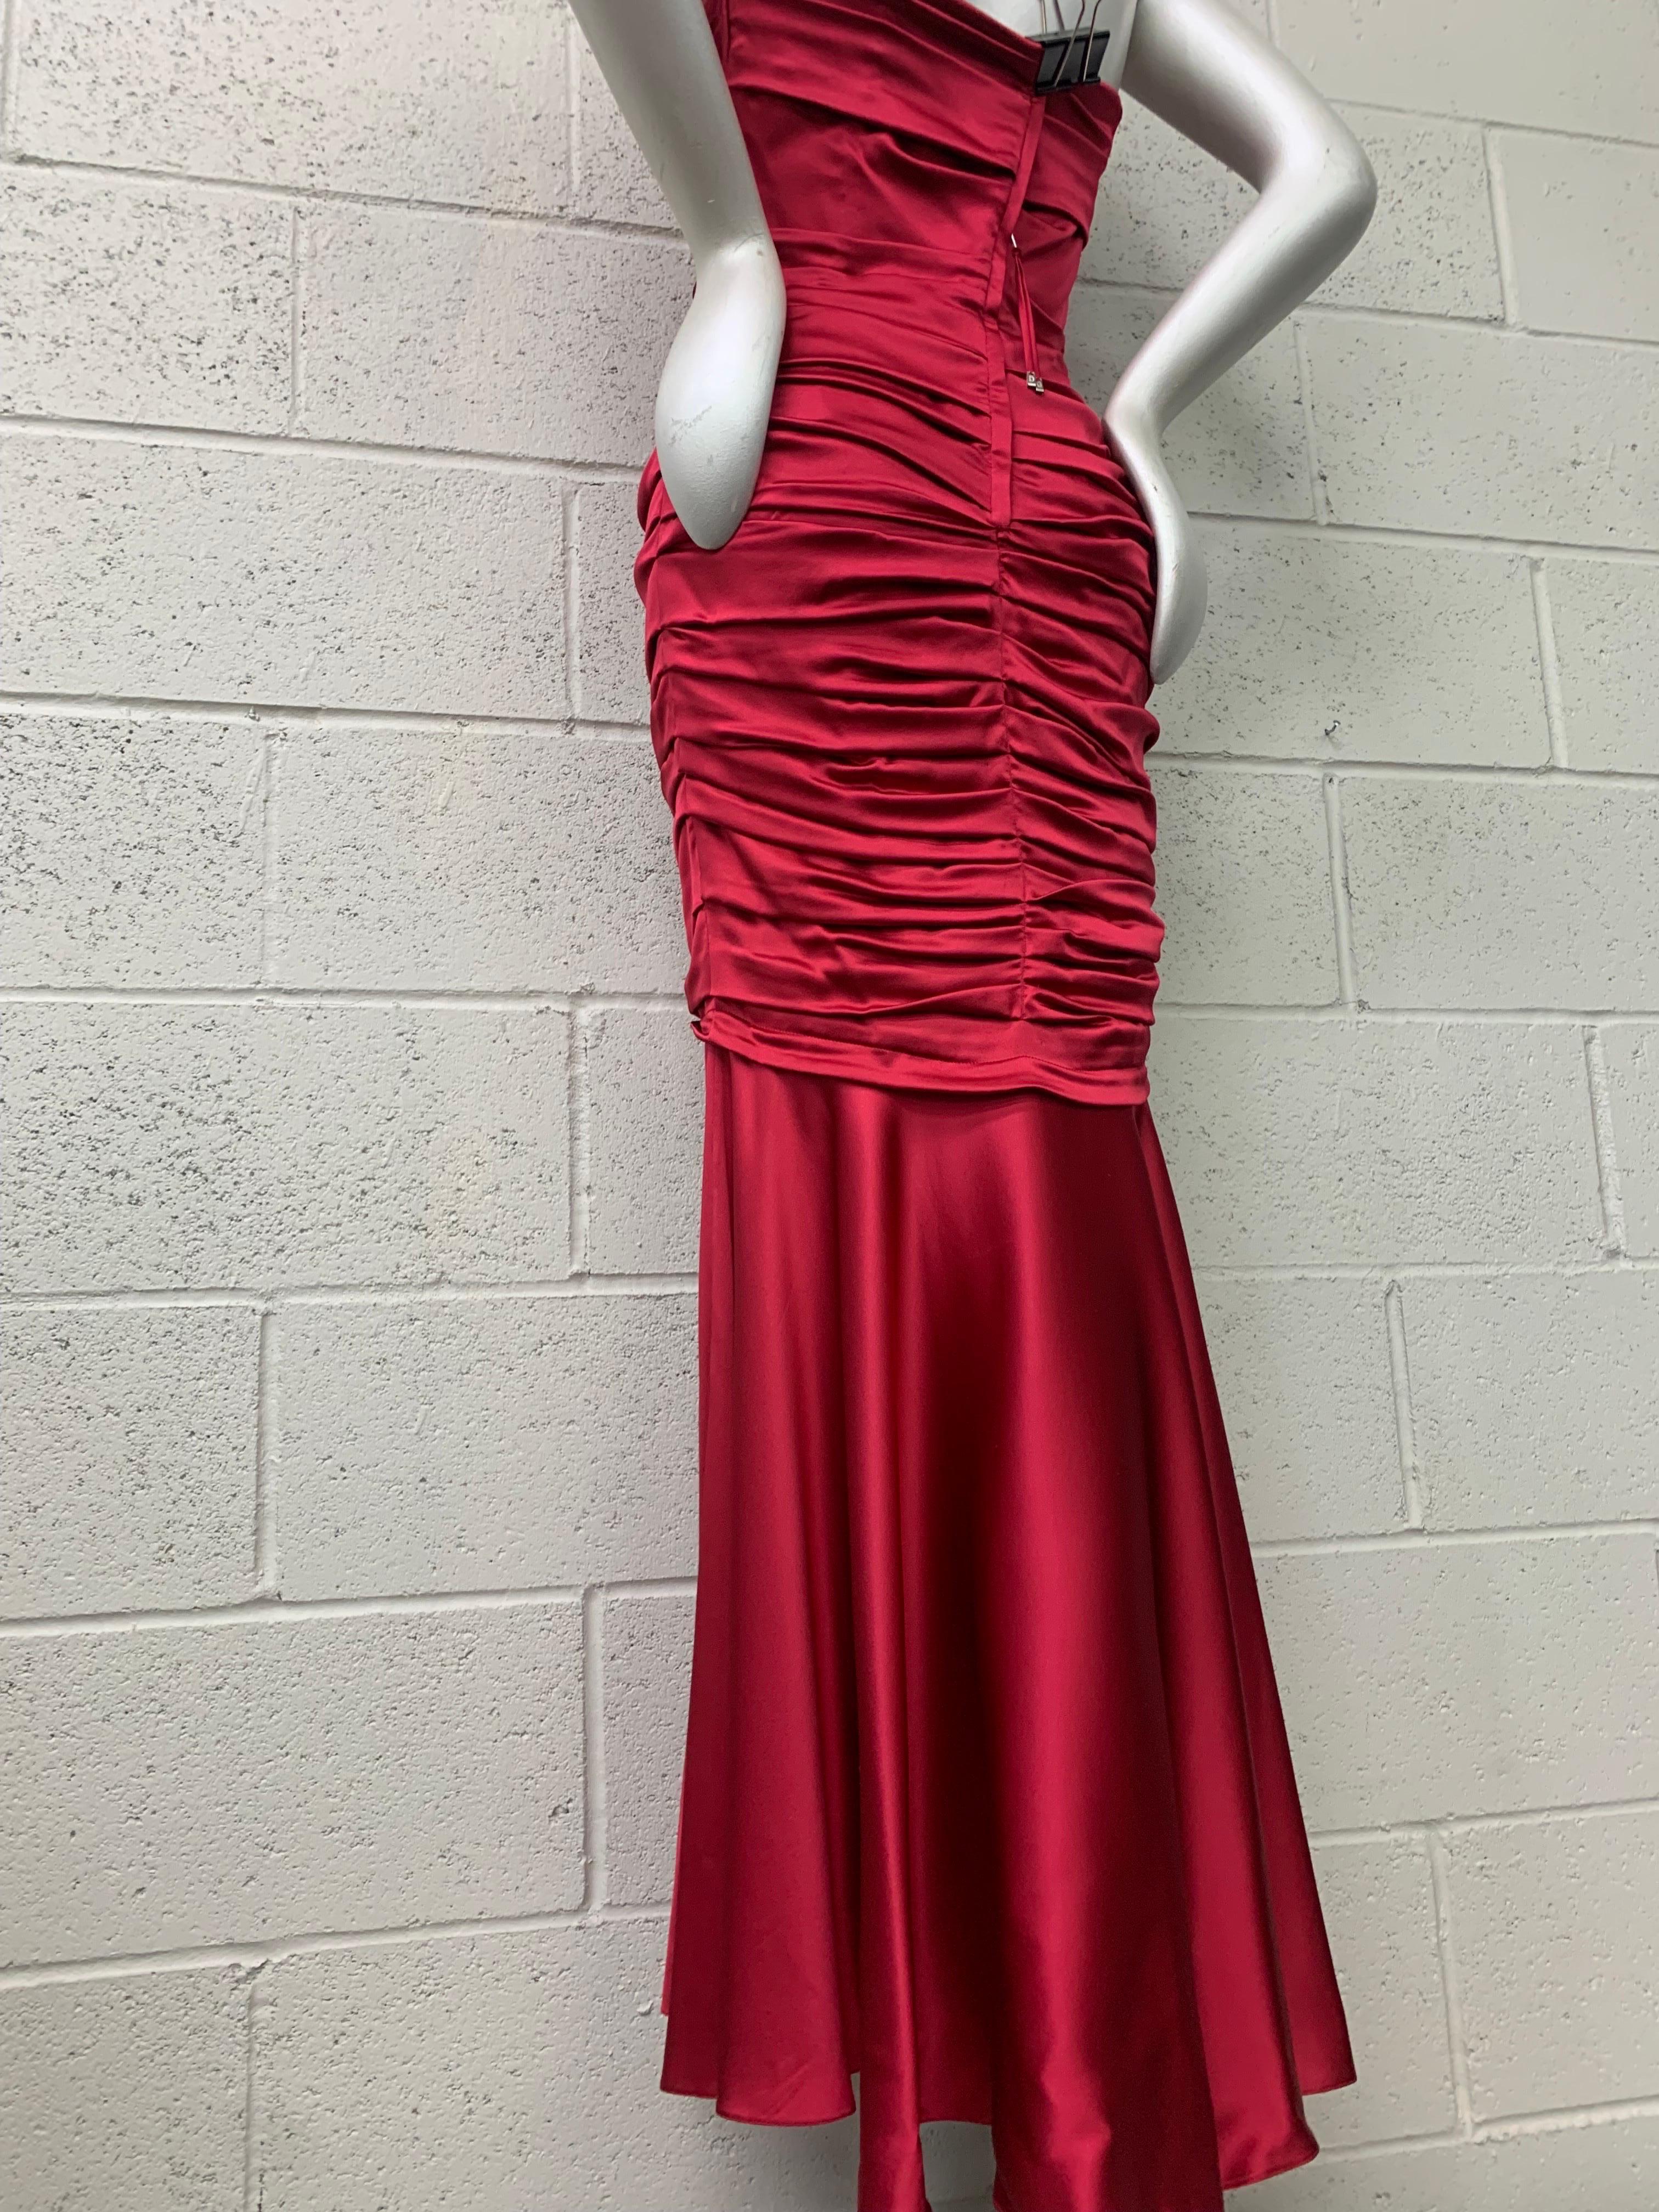 Dolce & Gabbana Red Satin Strapless Corset Gown w Fishtail Hem & Ruched Bodice For Sale 1